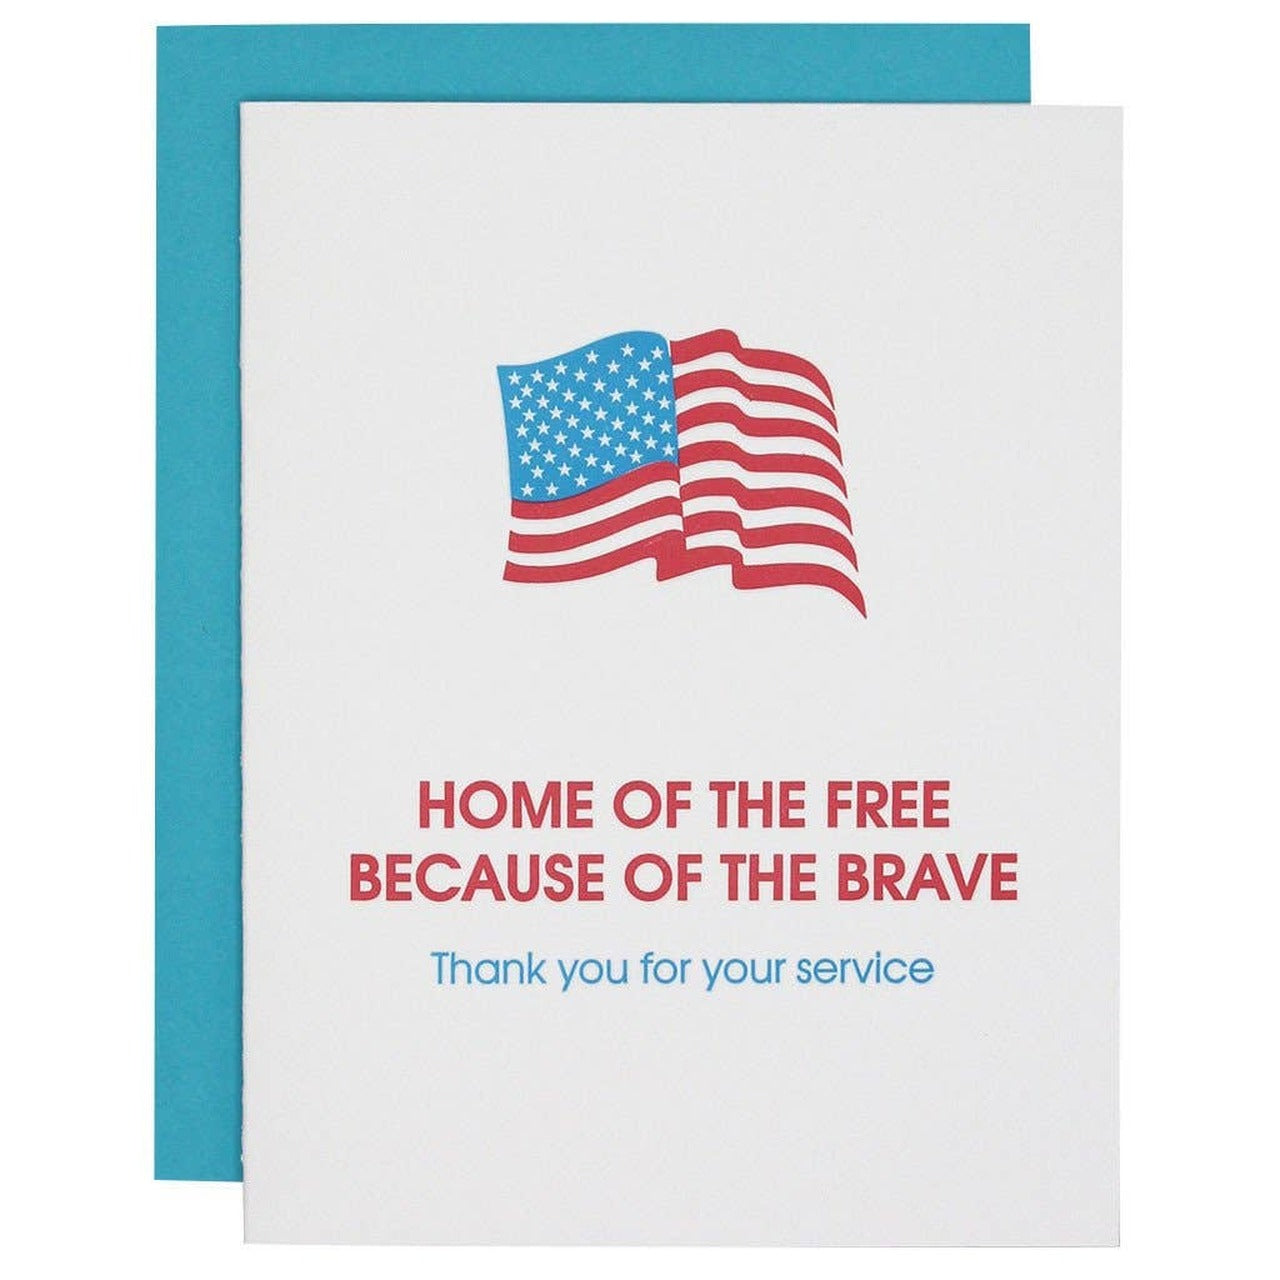 Home of the Free Card